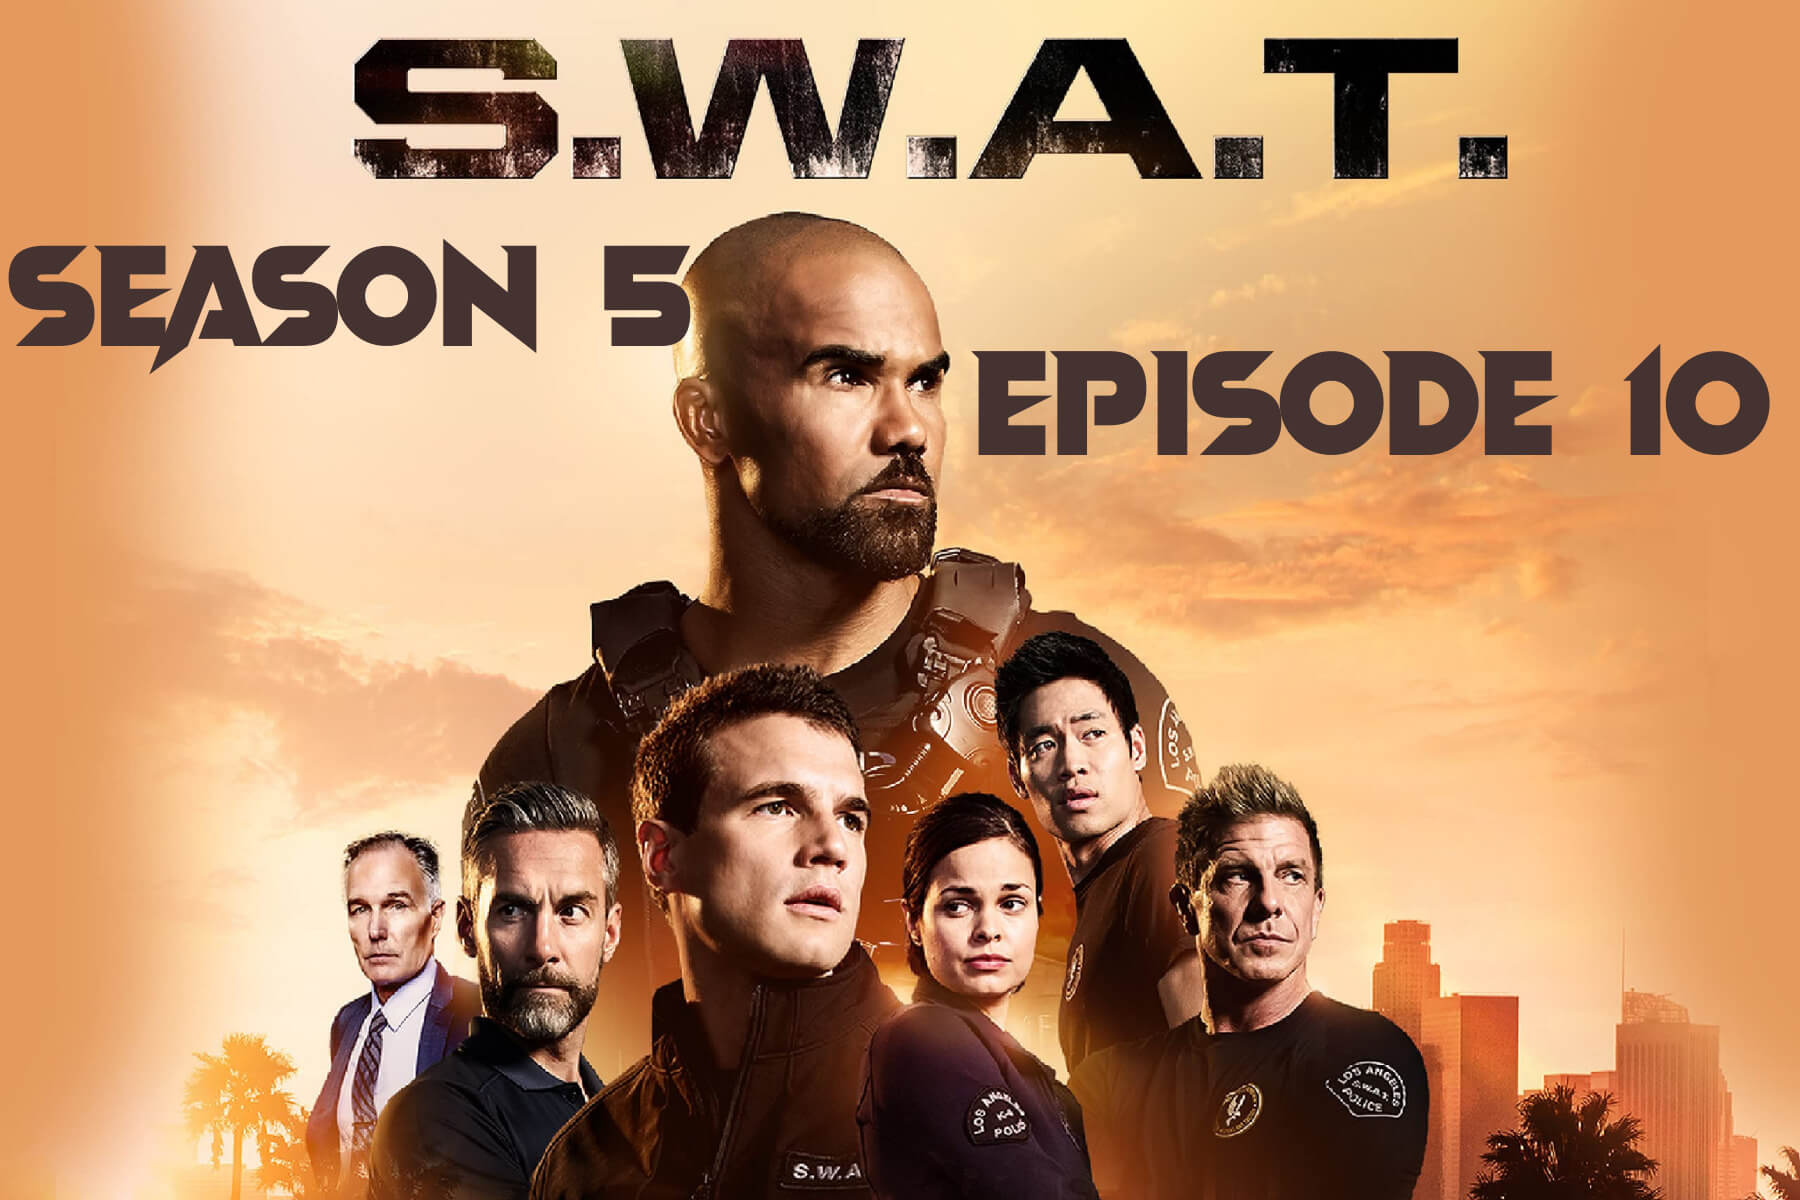 Will There be any Updates on SWAT Season 5 episodes 10 Trailer?